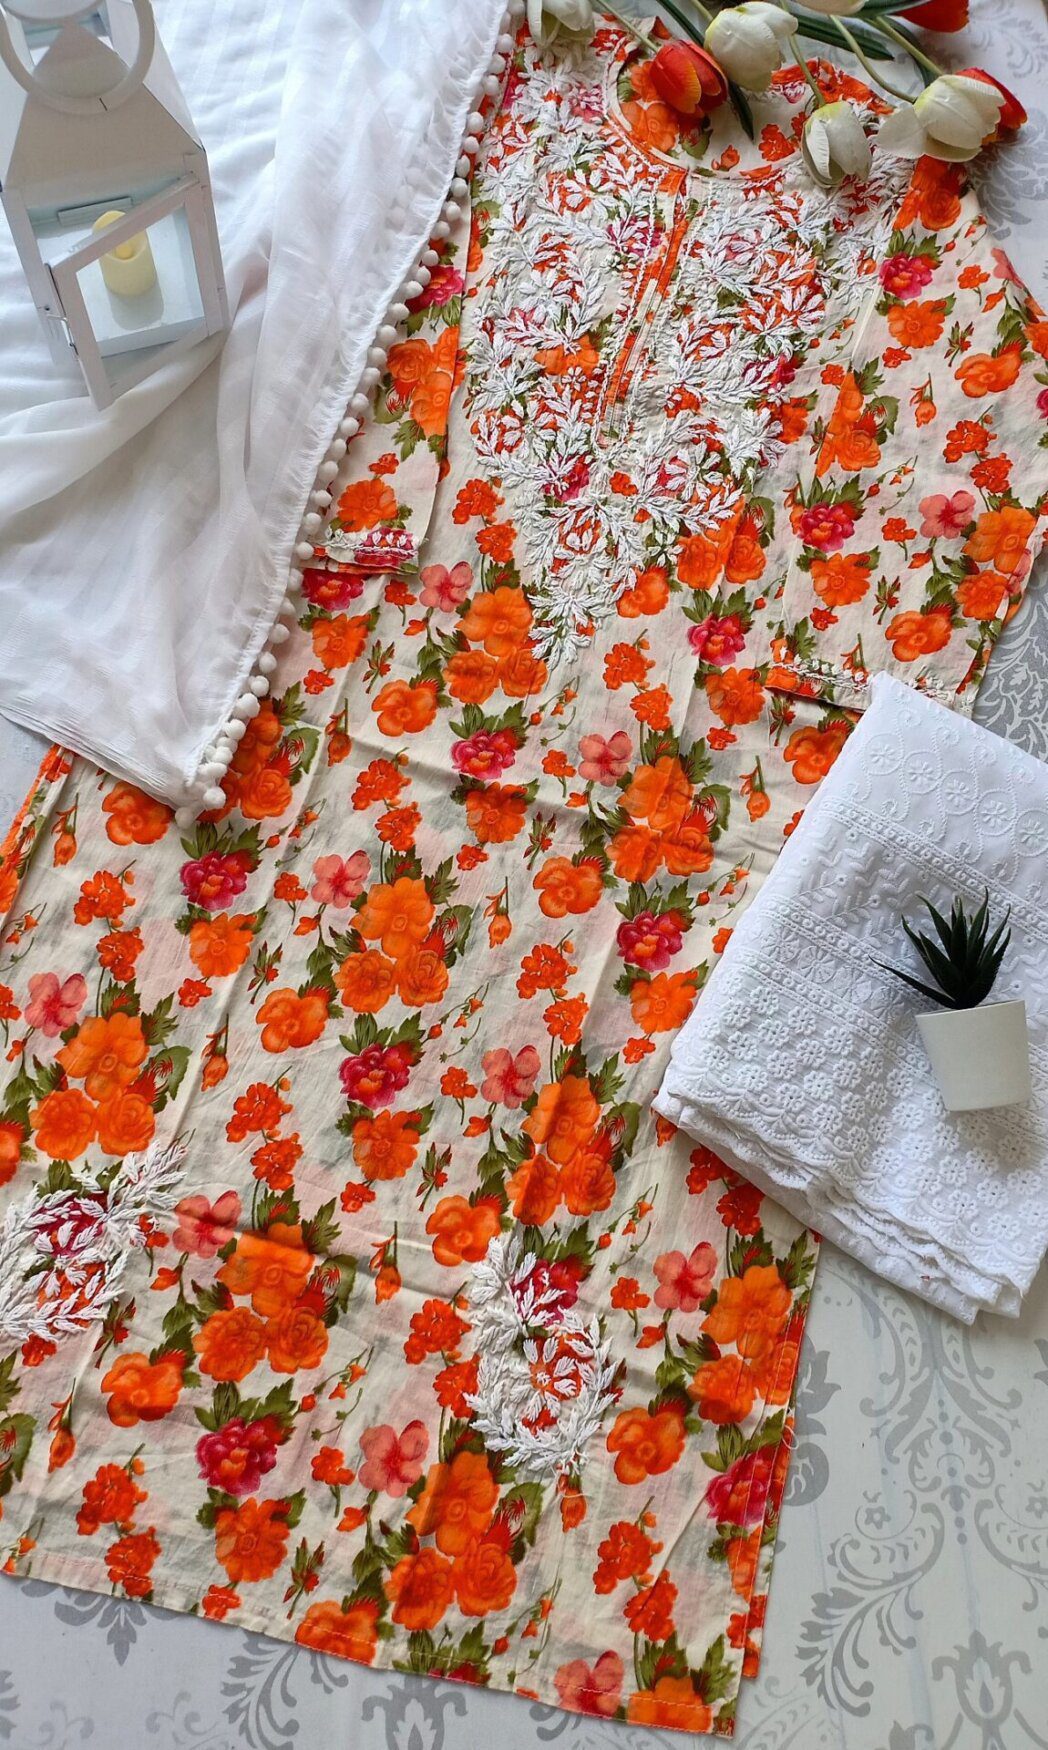 Bewitching Summer Floral Cotton Chikankari Outfit